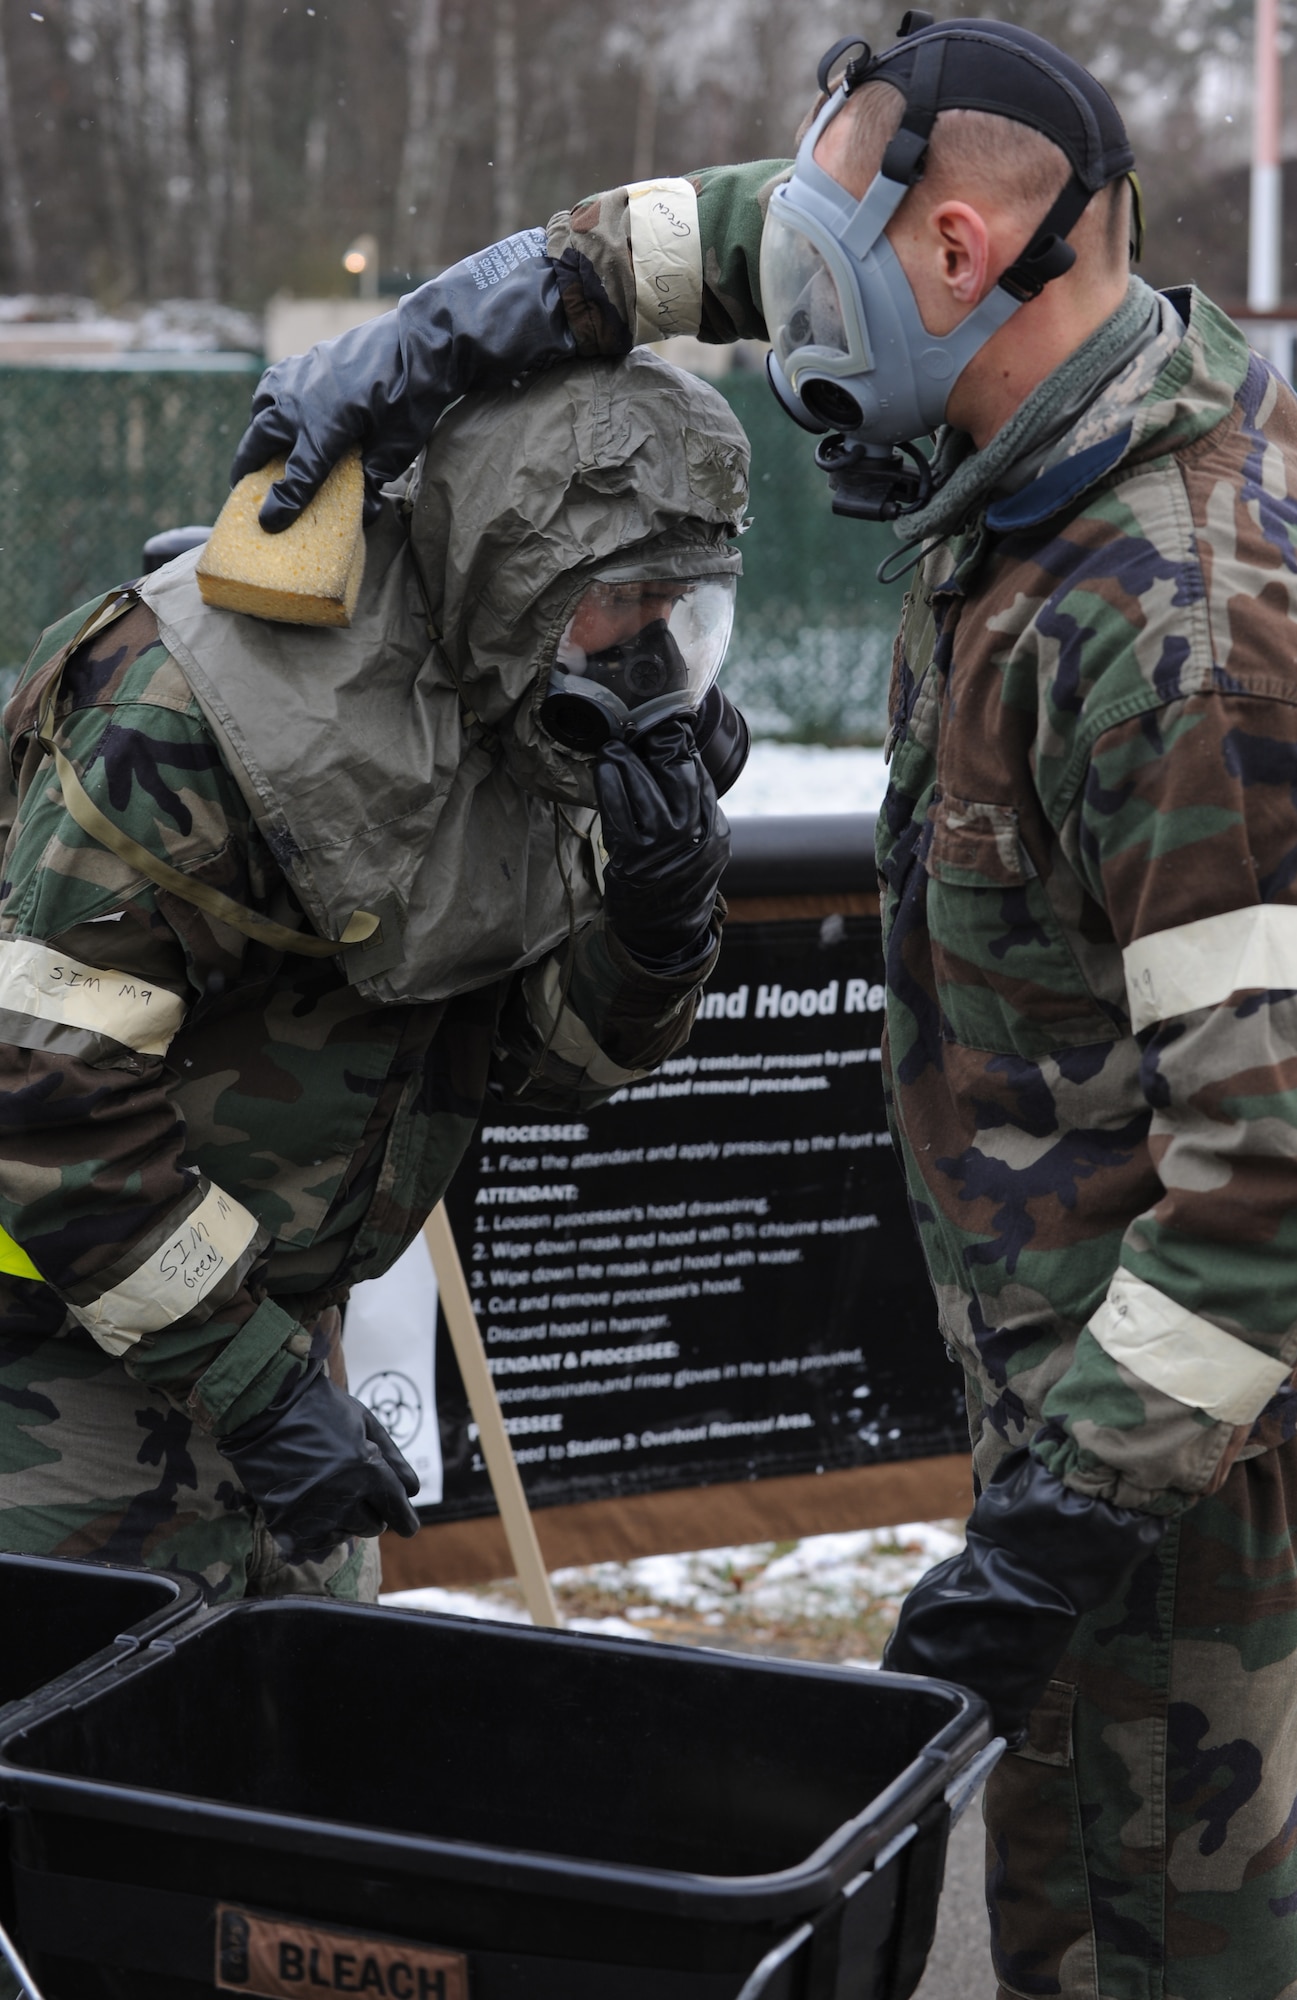 U.S. Air Force Staff Sgt. Jonathan Jones and Senior Airman Joel Halpin, 86th Maintenance Squadron, utilize the buddy system to decontaminate each other during an exercise scenario, Ramstein Air Base, Germany, Dec. 15, 2009. The wing is conducting an exercise to evaluate its mission readiness and the ability to survive and operate in a chemical environment. (U.S. Air Force photo by Airman 1st Class Caleb Pierce)